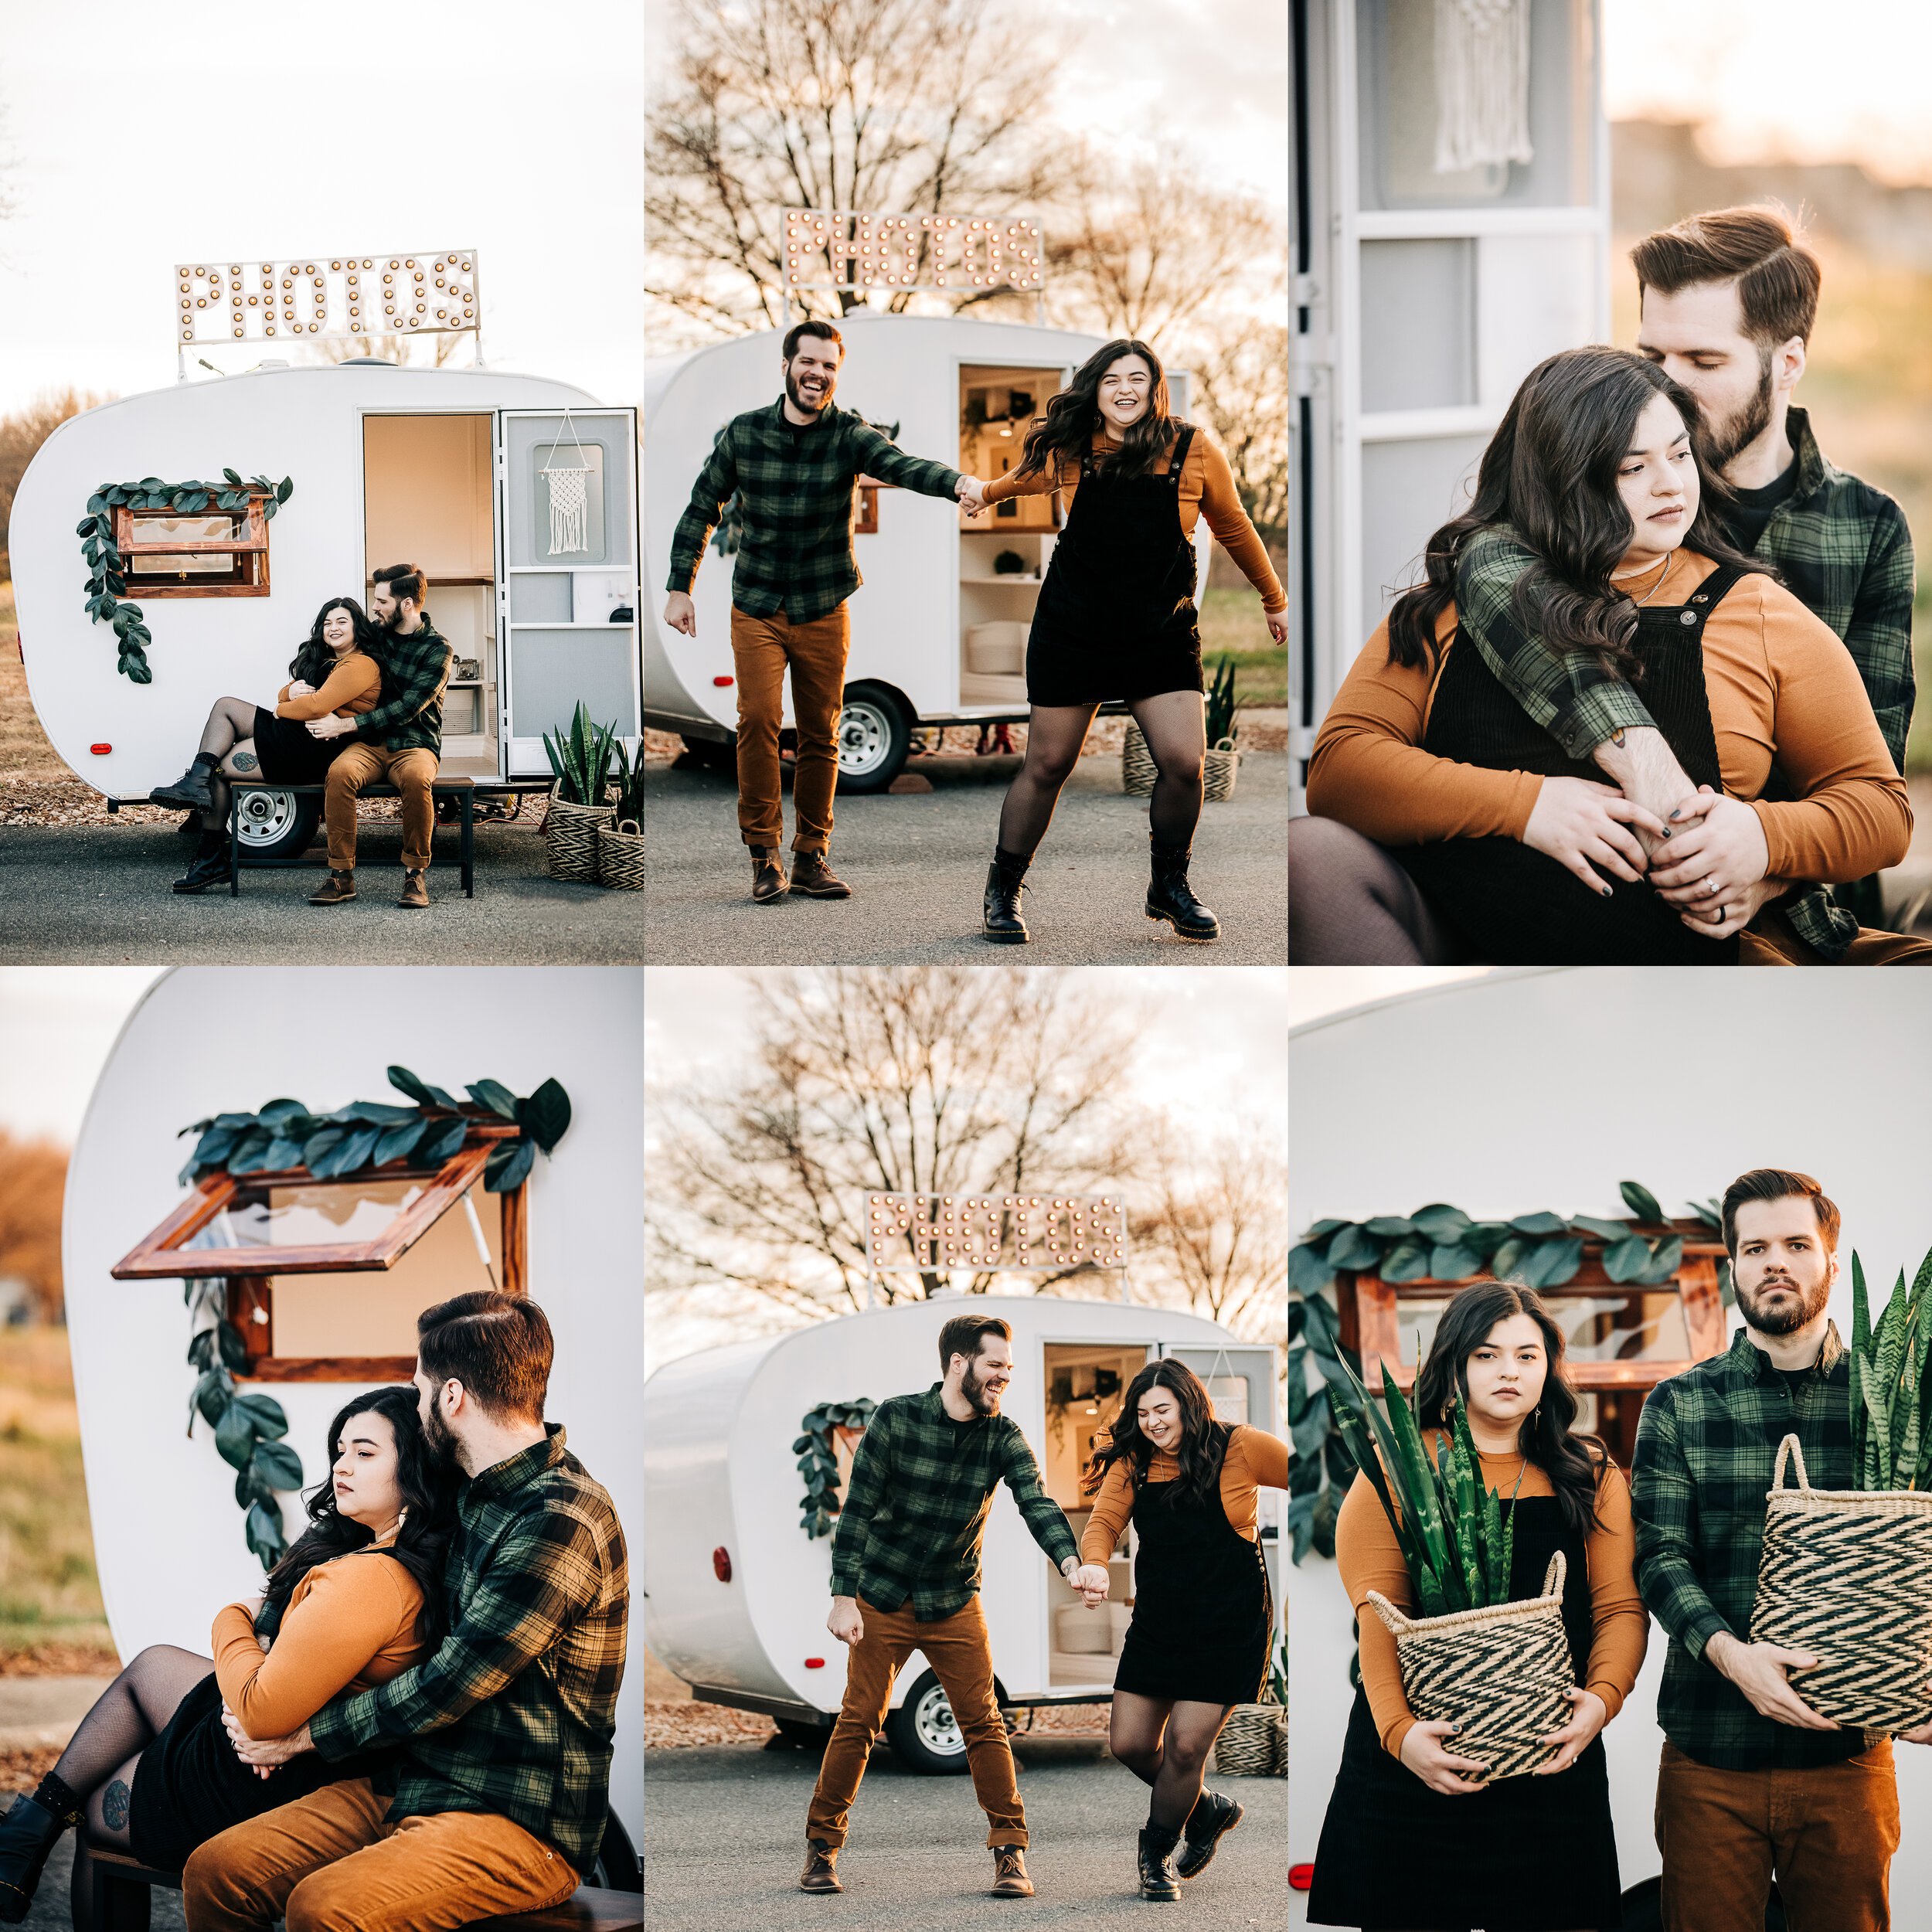 Couple's photo shoot with vintage camper